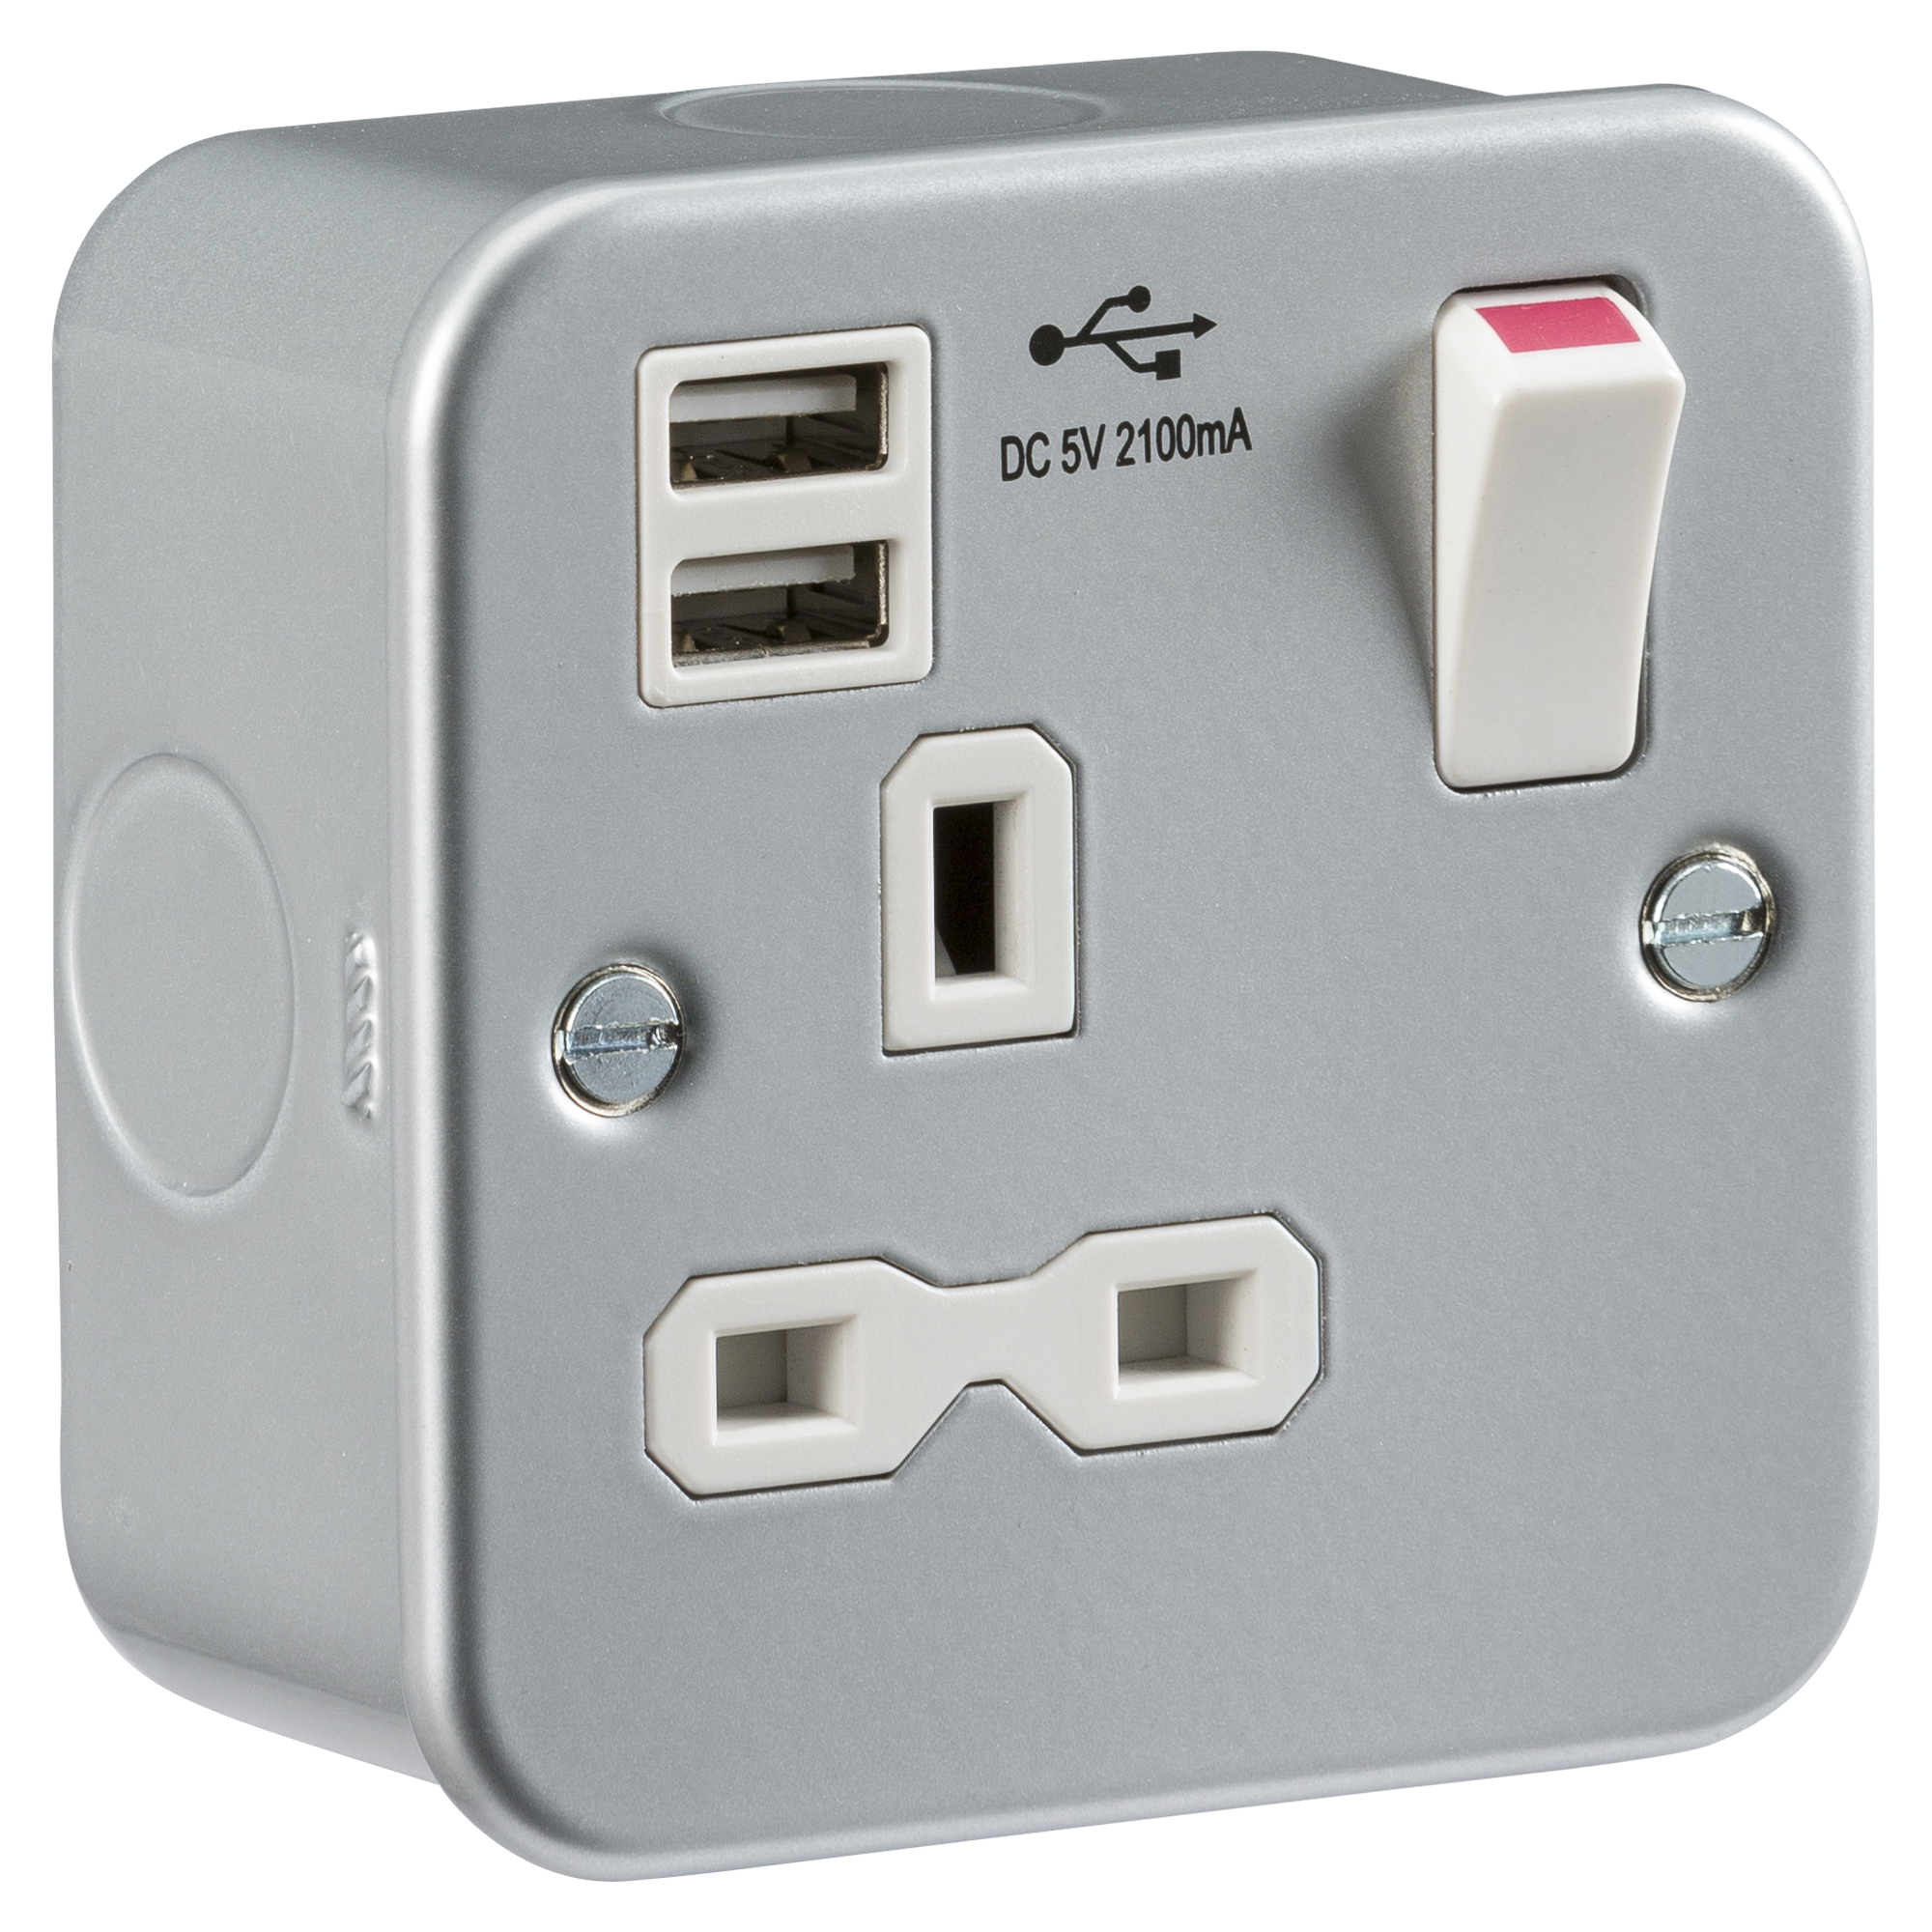 Metal Clad 13A 1G Switched Socket With Dual USB Charger 5V DC 2.1A (shared) - MR7000USB 